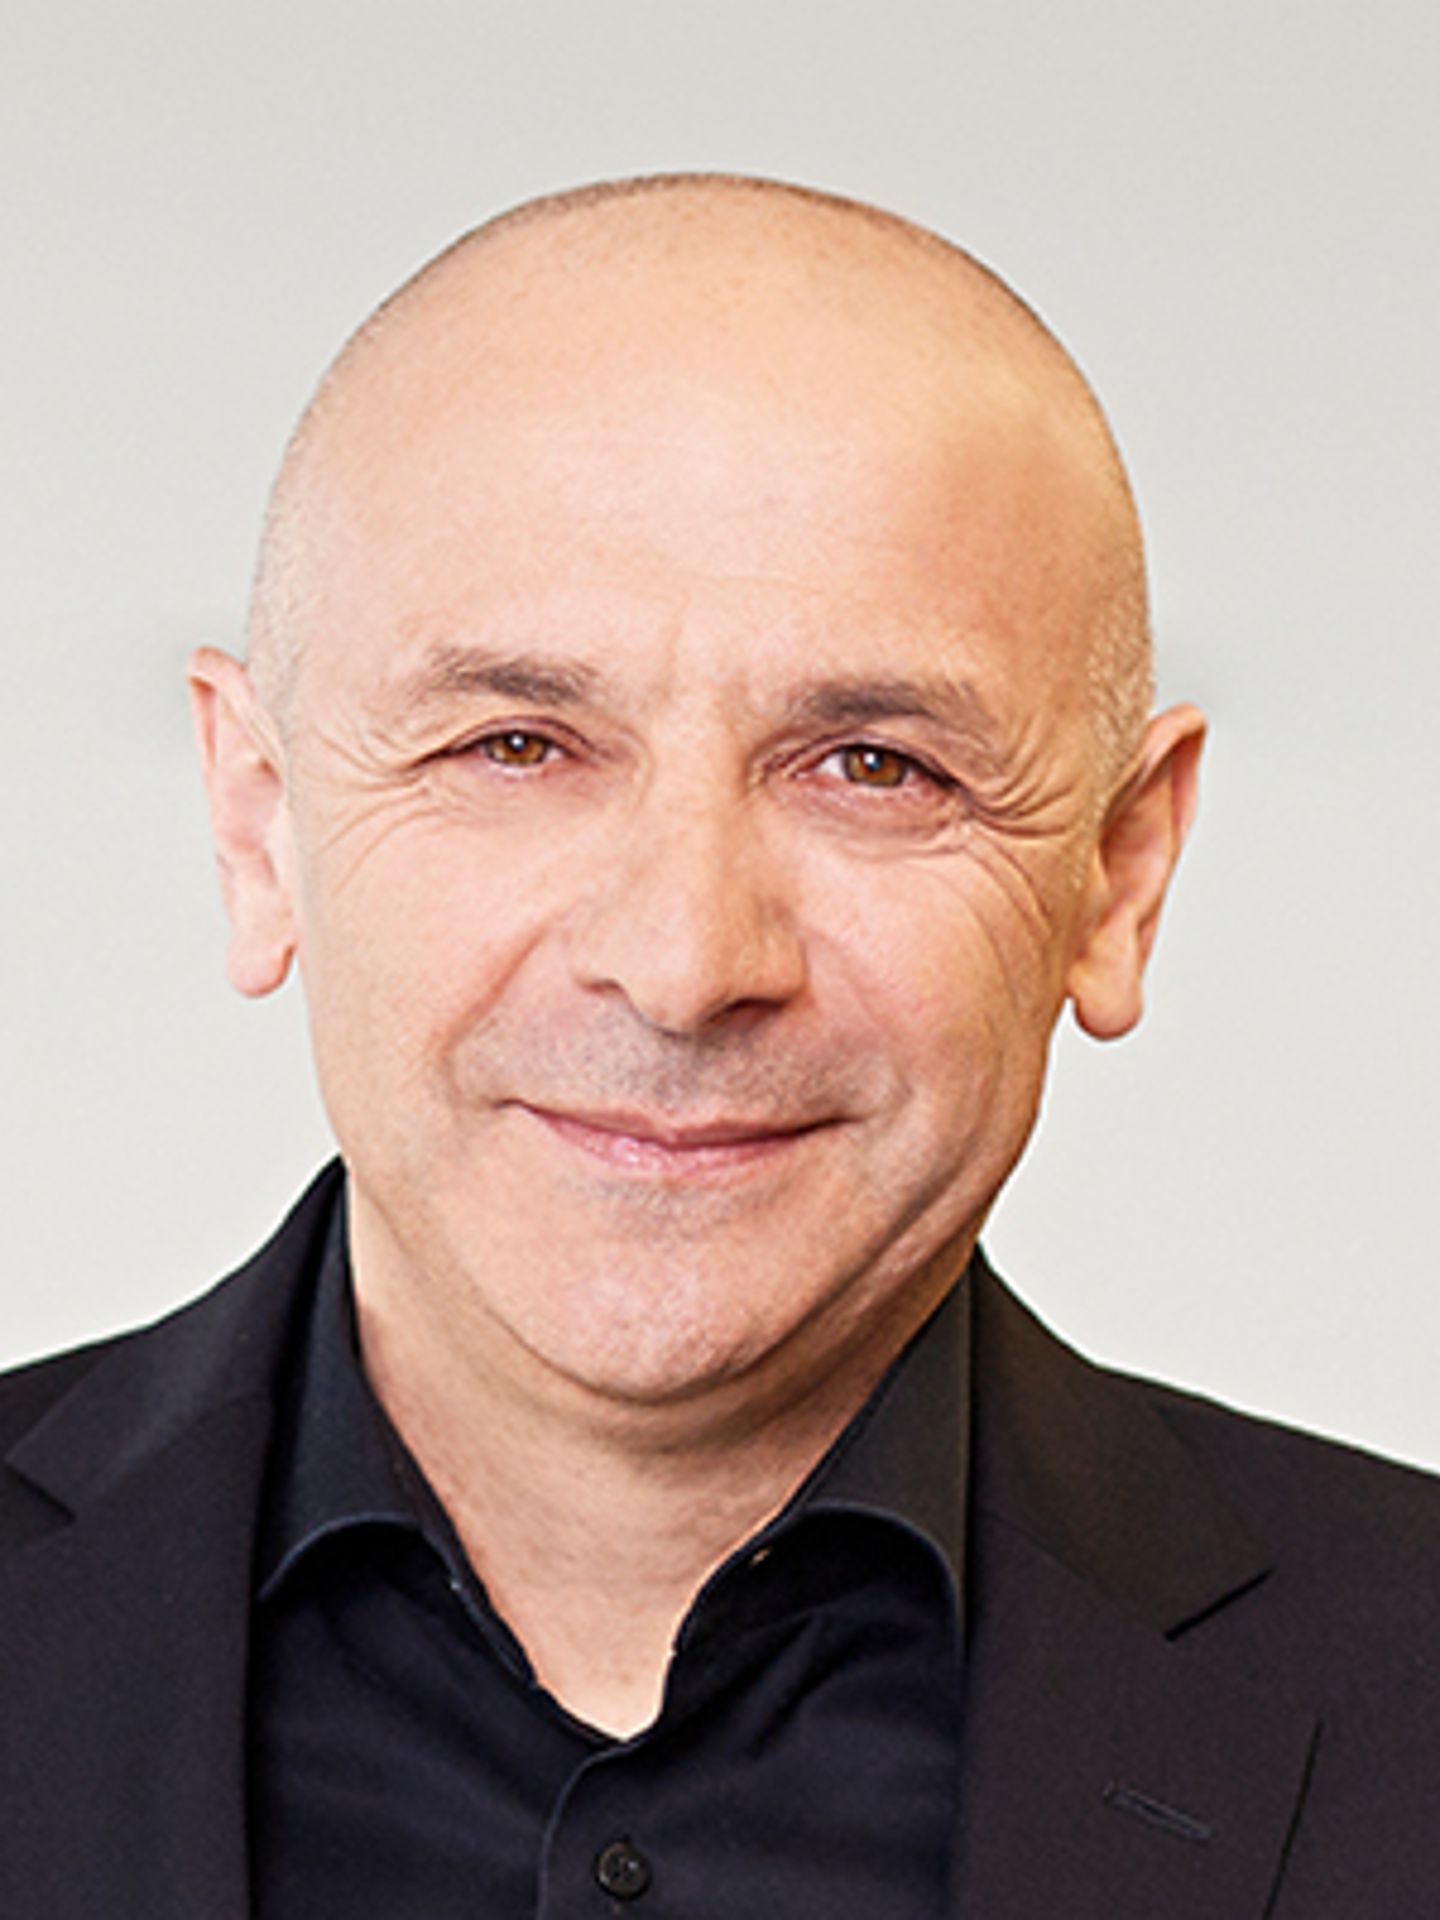 Murat Aksel, Chief Purchasing Officer of the TRATON GROUP